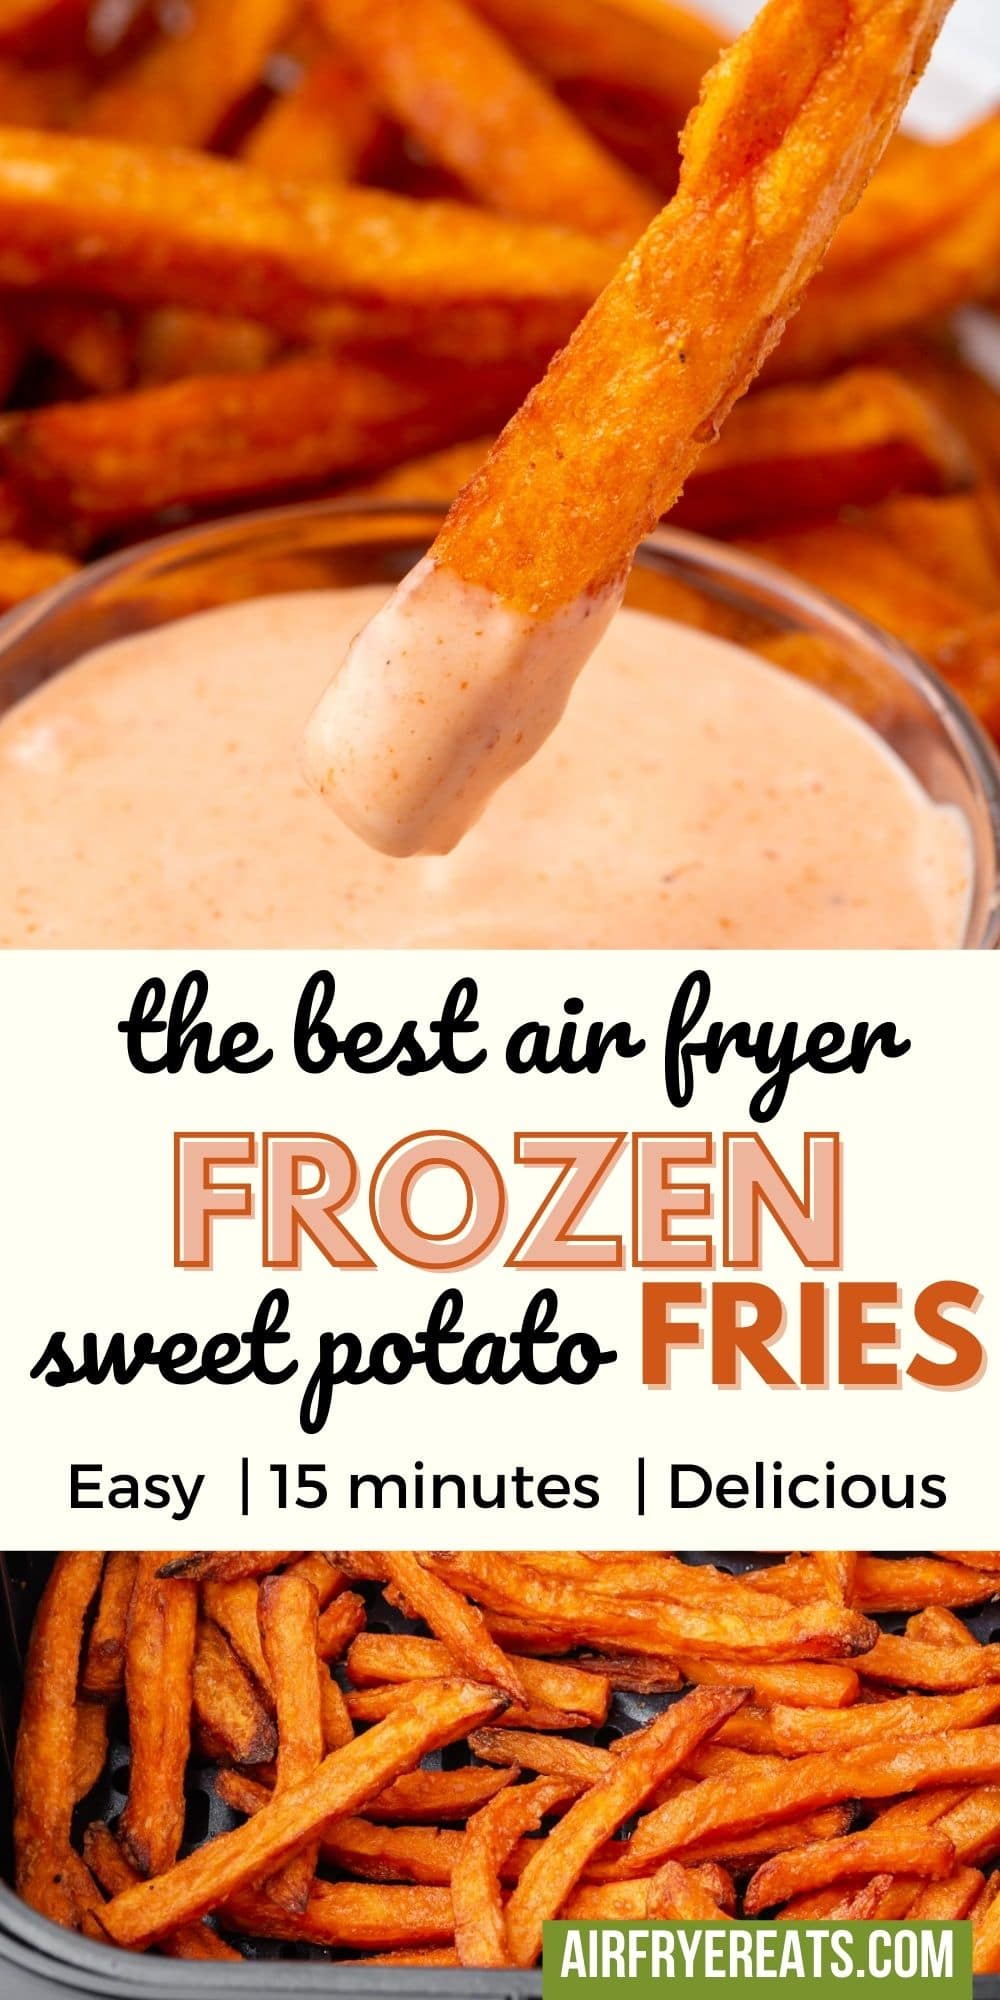 Frozen Sweet Potato Fries in the Air Fryer are a super simple, delicious side dish or snack that you can make in less than 15 minutes! These fries are crispy and perfect, straight from your favorite air fryer. #airfryer #sweetpotatofries via @vegetarianmamma